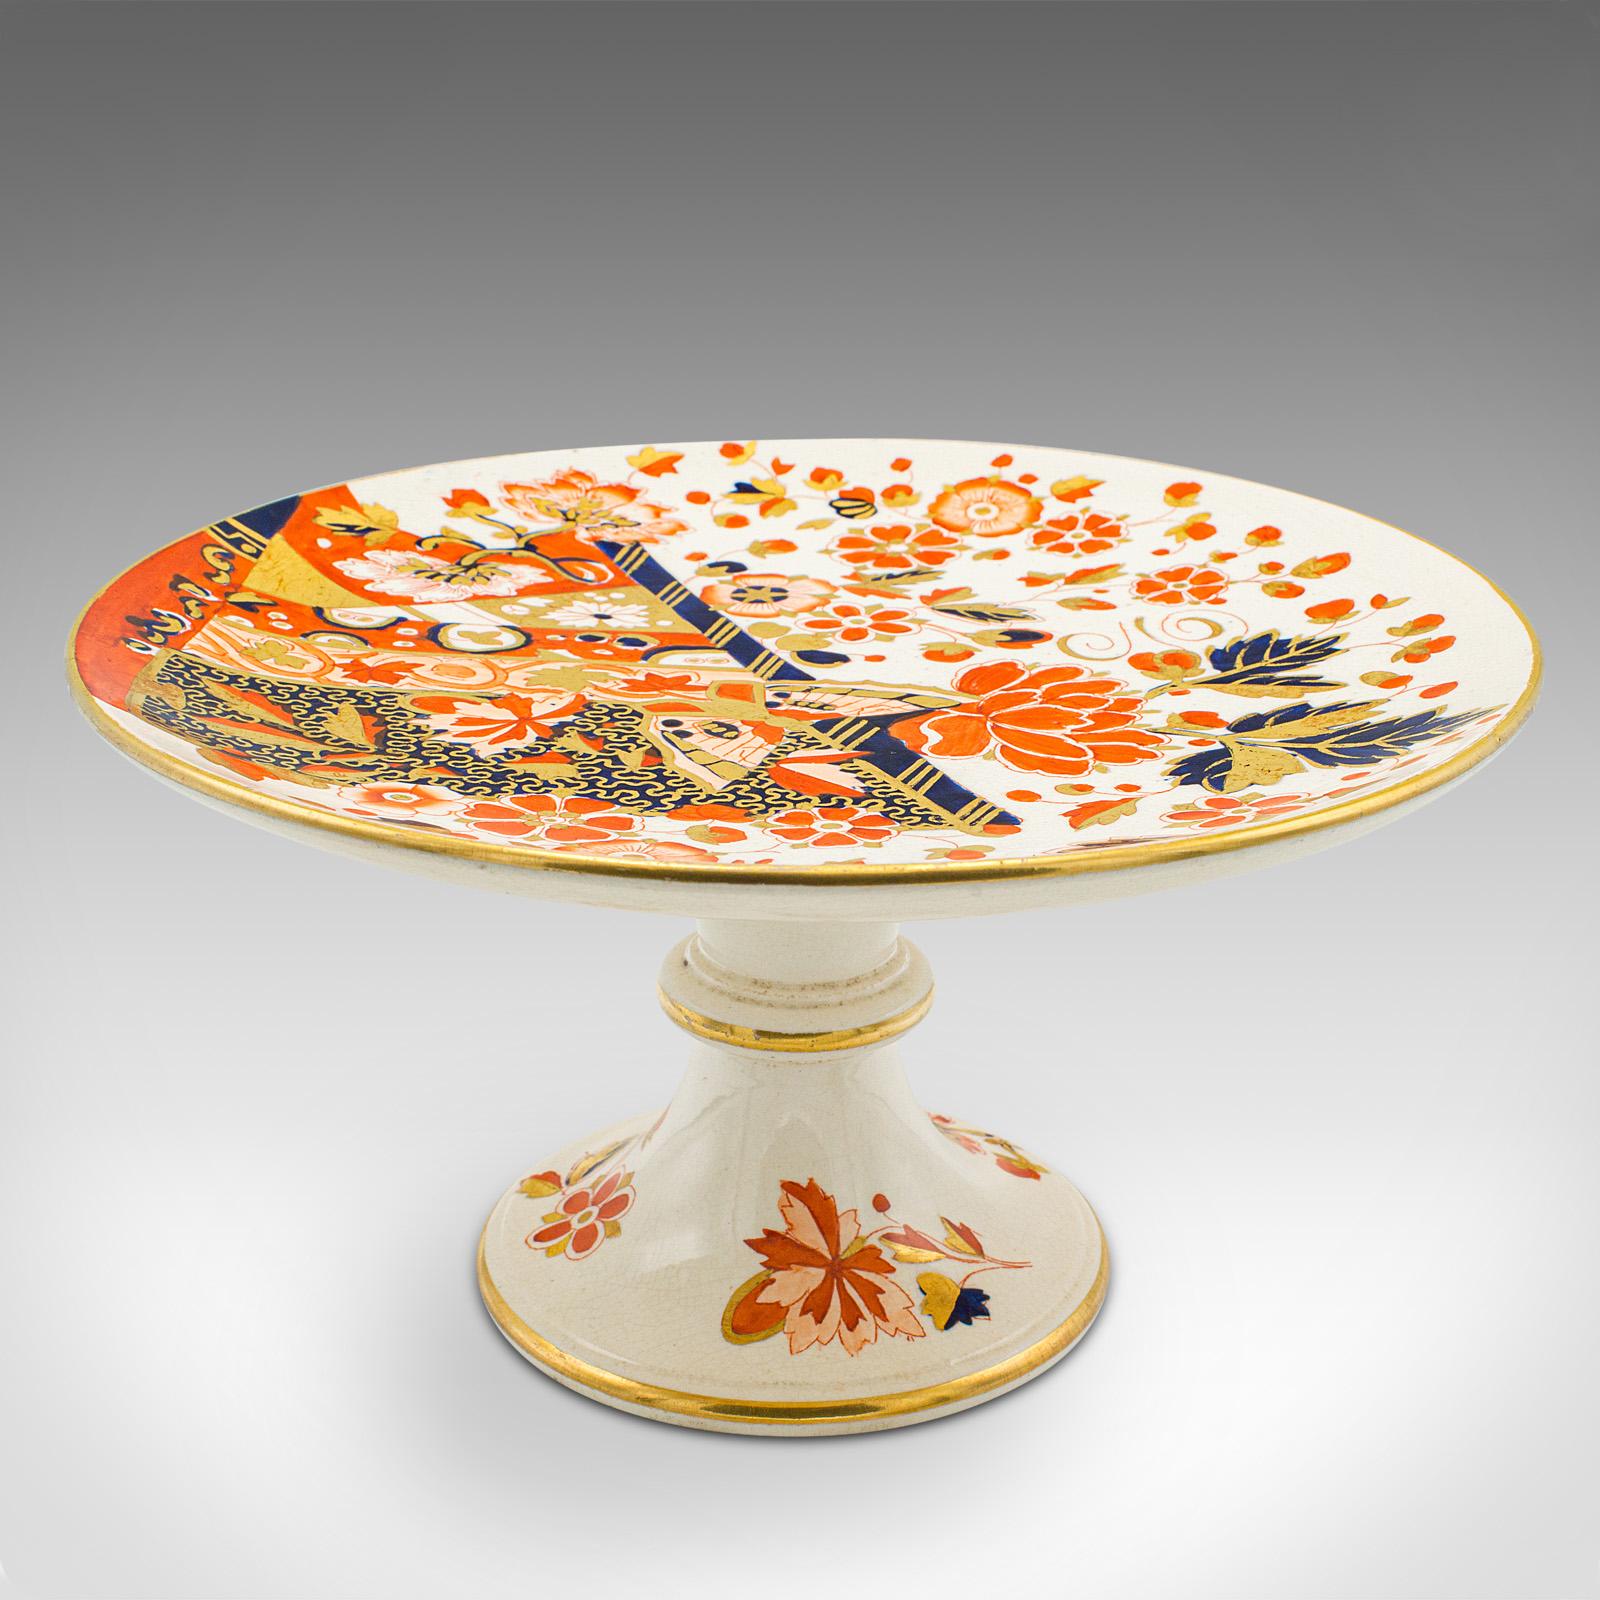 British Antique Decorative Cake Stand, Sugar Bowl, English, Afternoon Tea, Victorian For Sale